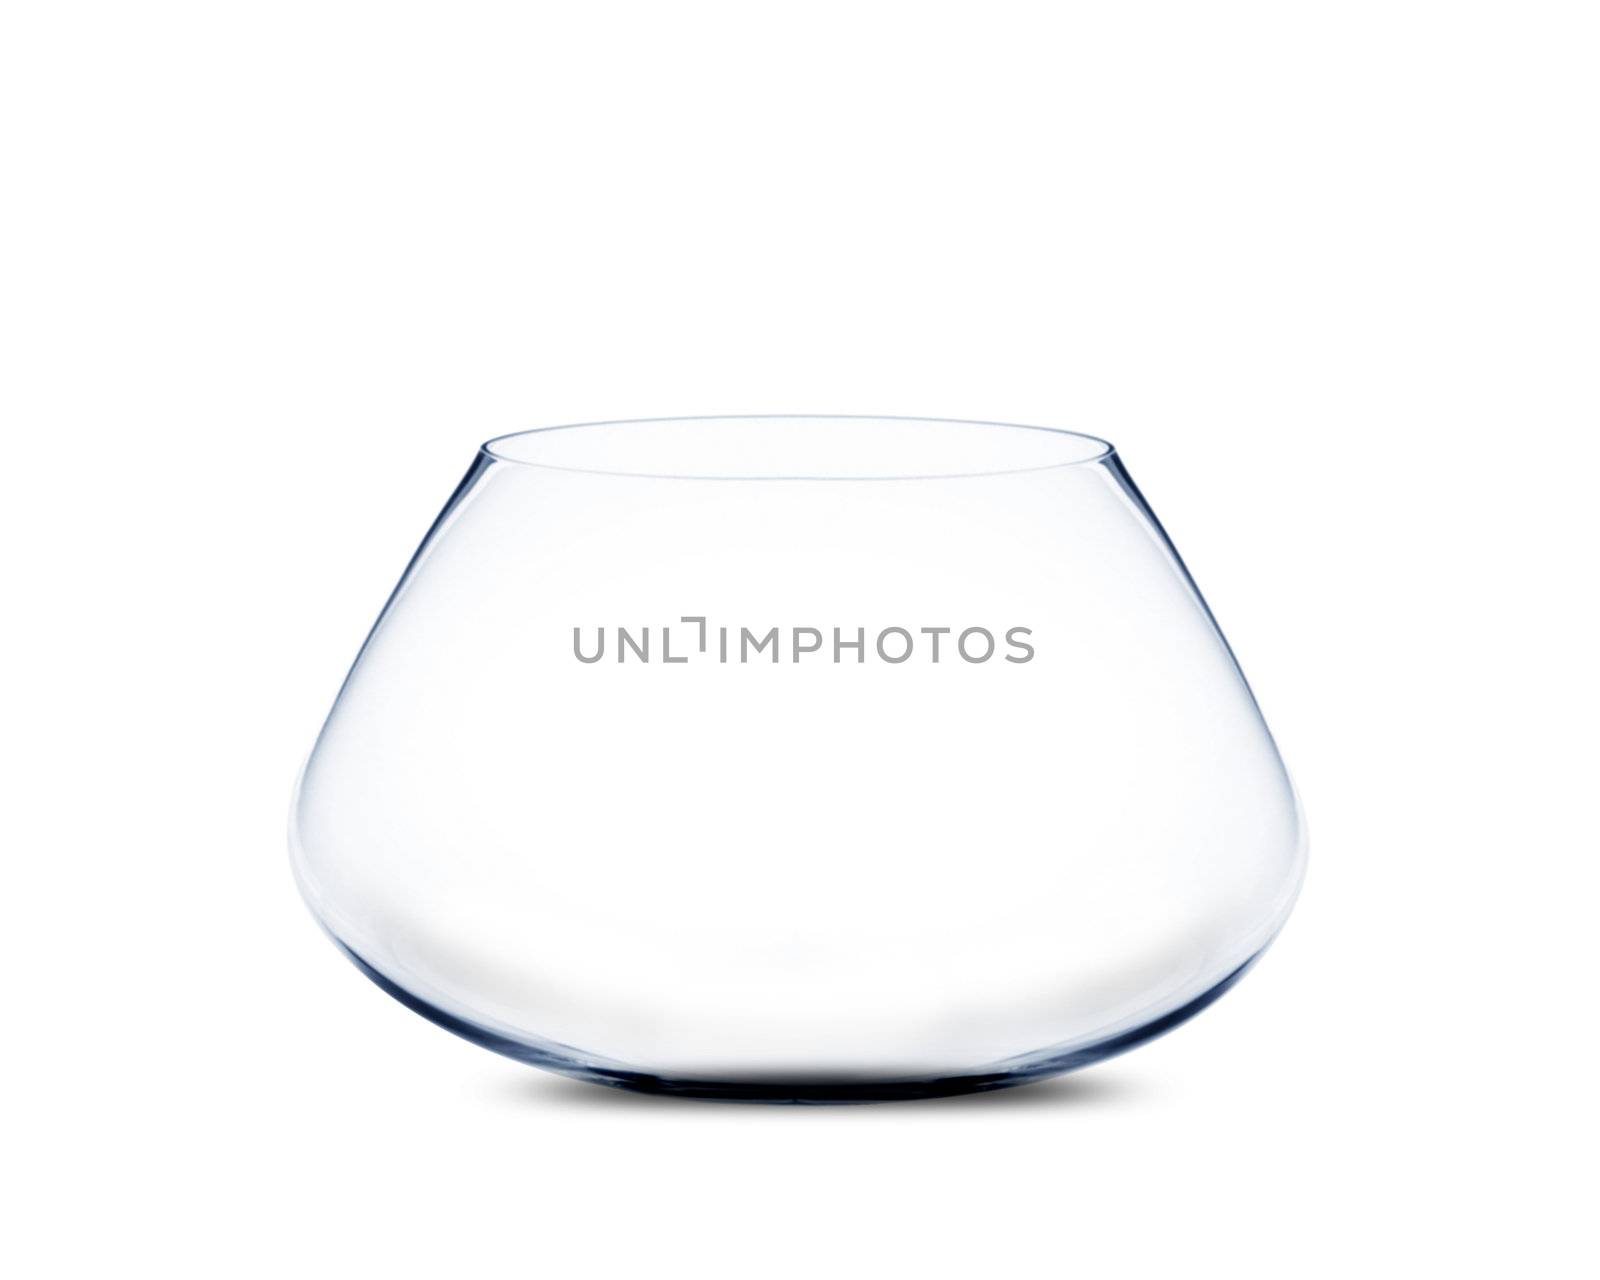 isolated Empty fishbowl without water in front of white background.